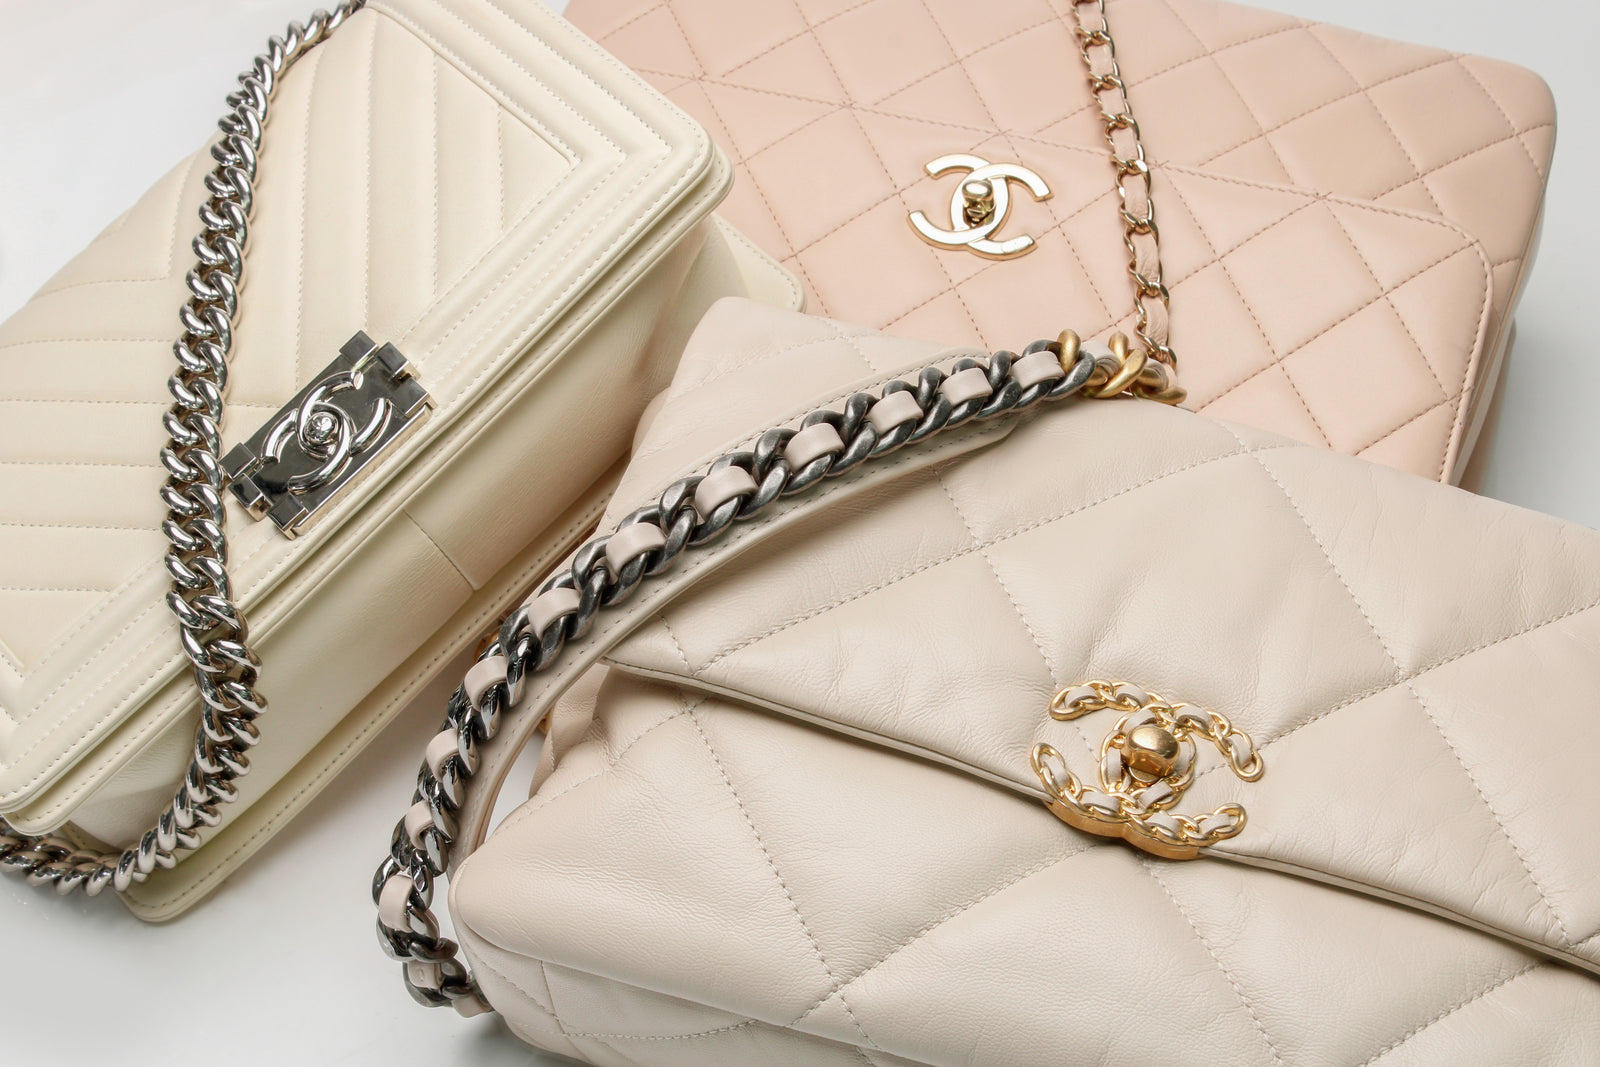 vintage chanel clutch bags